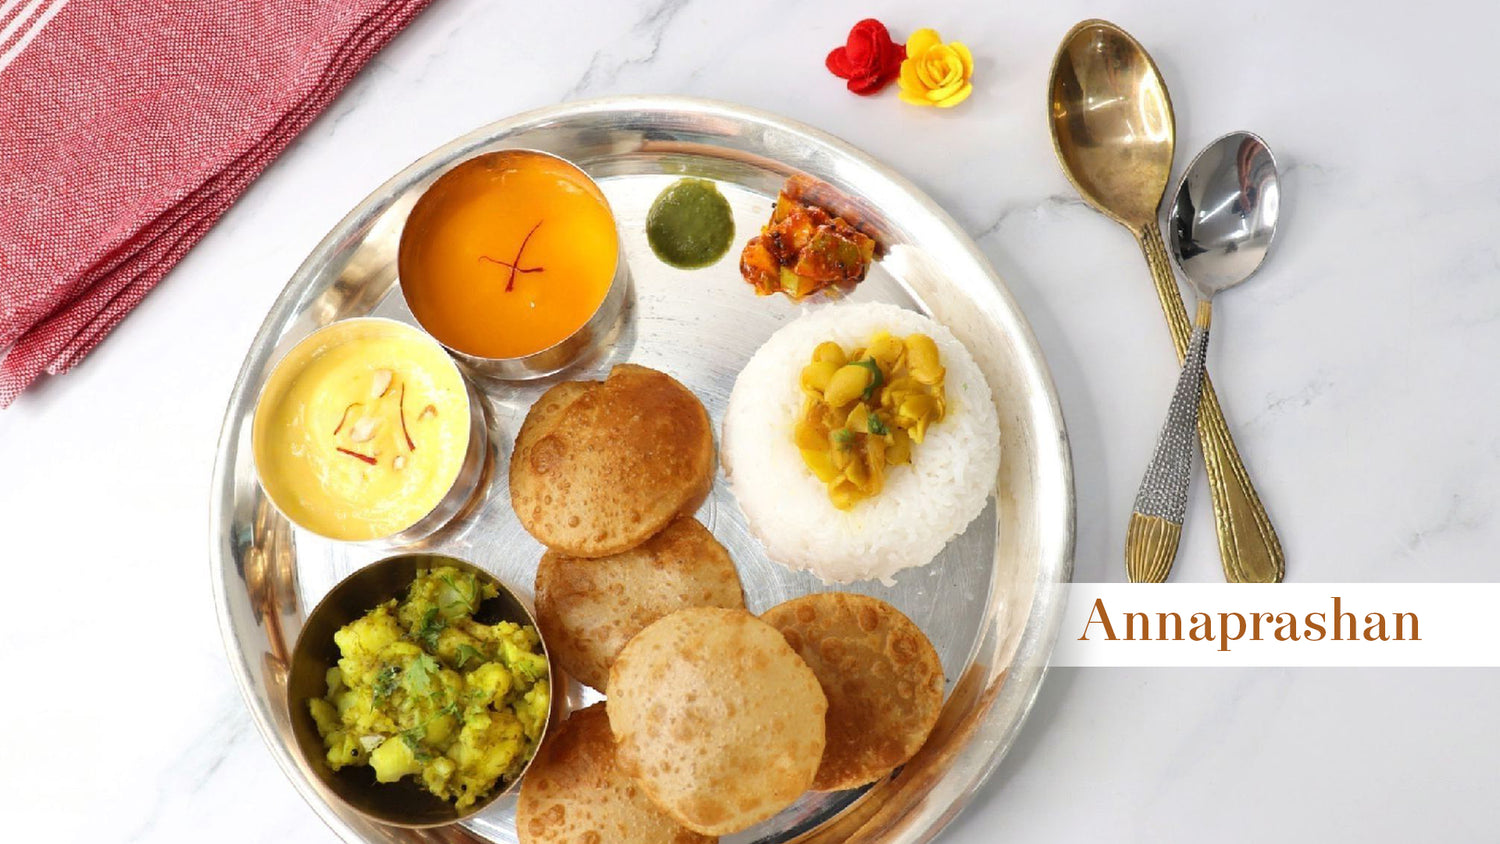 Annaprashan: The First Meal Of Your Baby